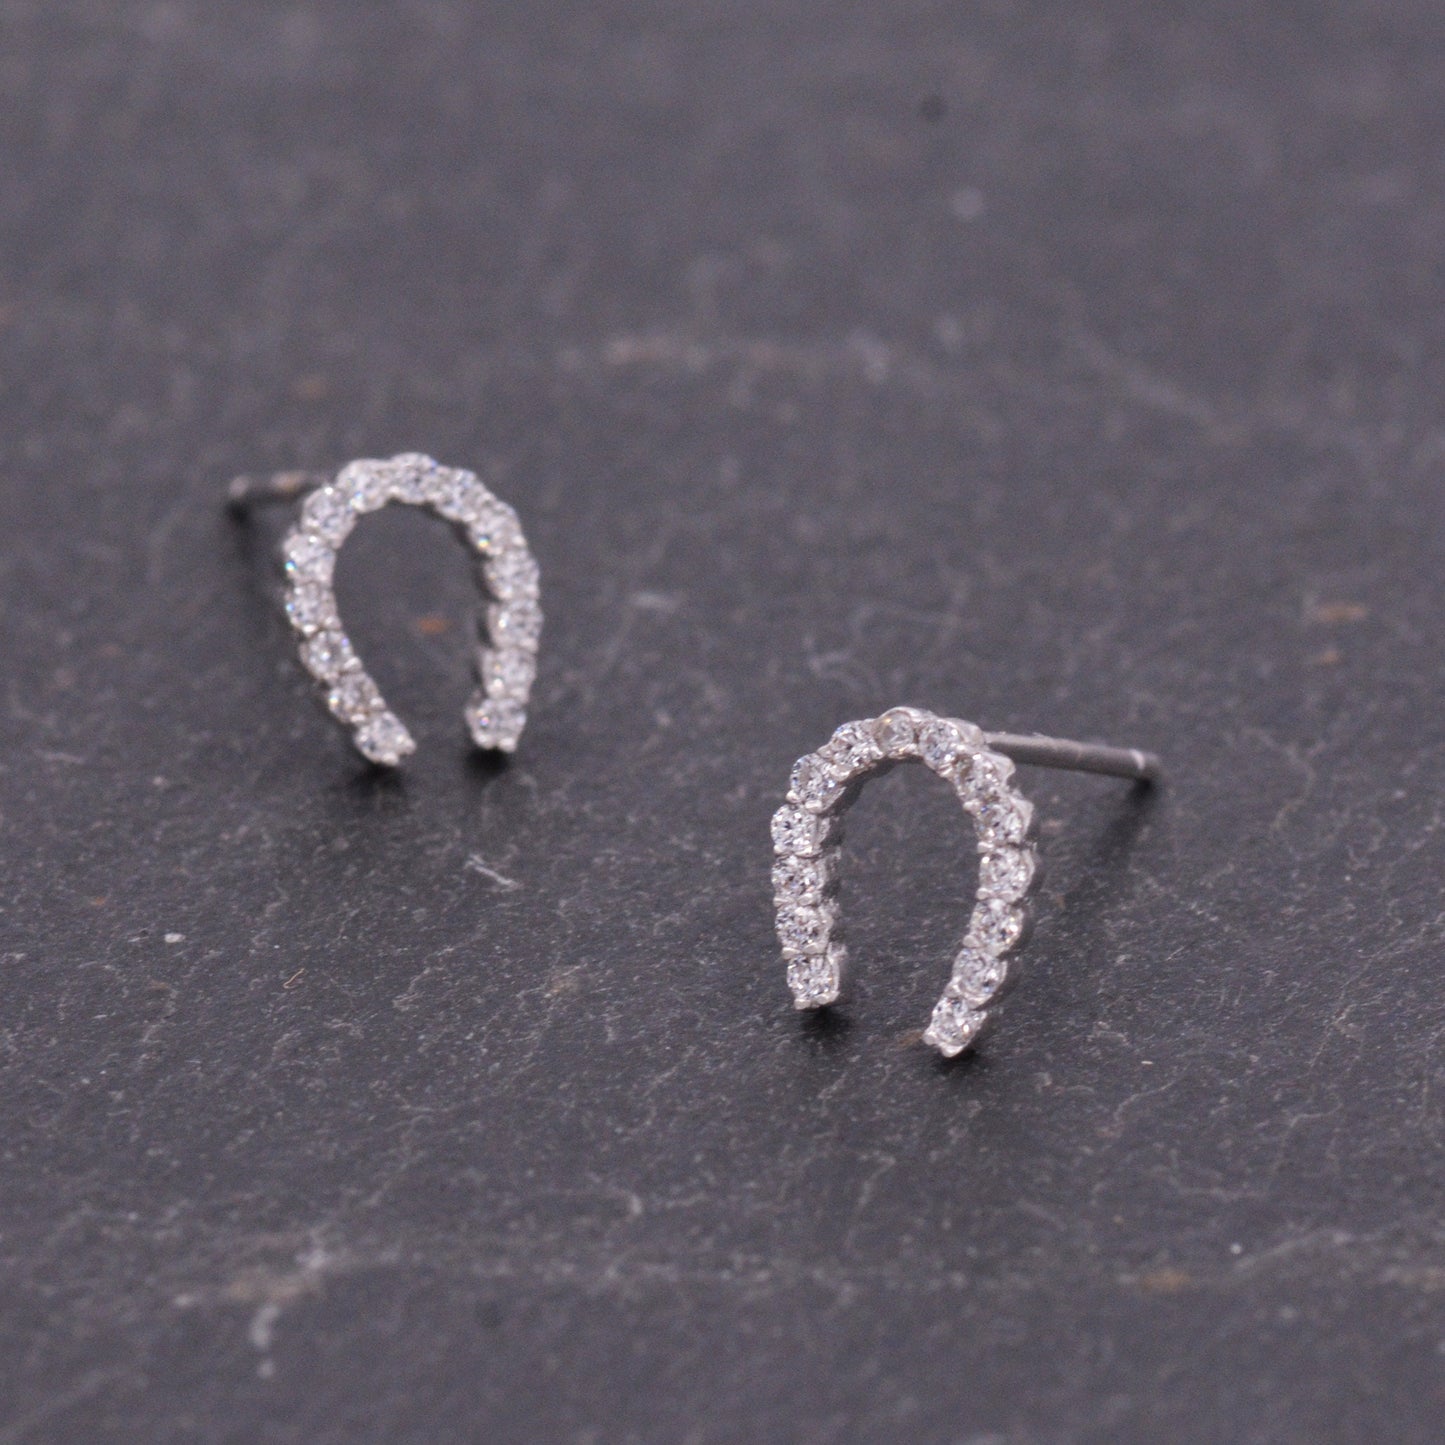 Sterling Silver Horseshoe Stud Earrings with Sparkling CZ Crystals, Fun and Quirky, Jewellery for Good Luck K35